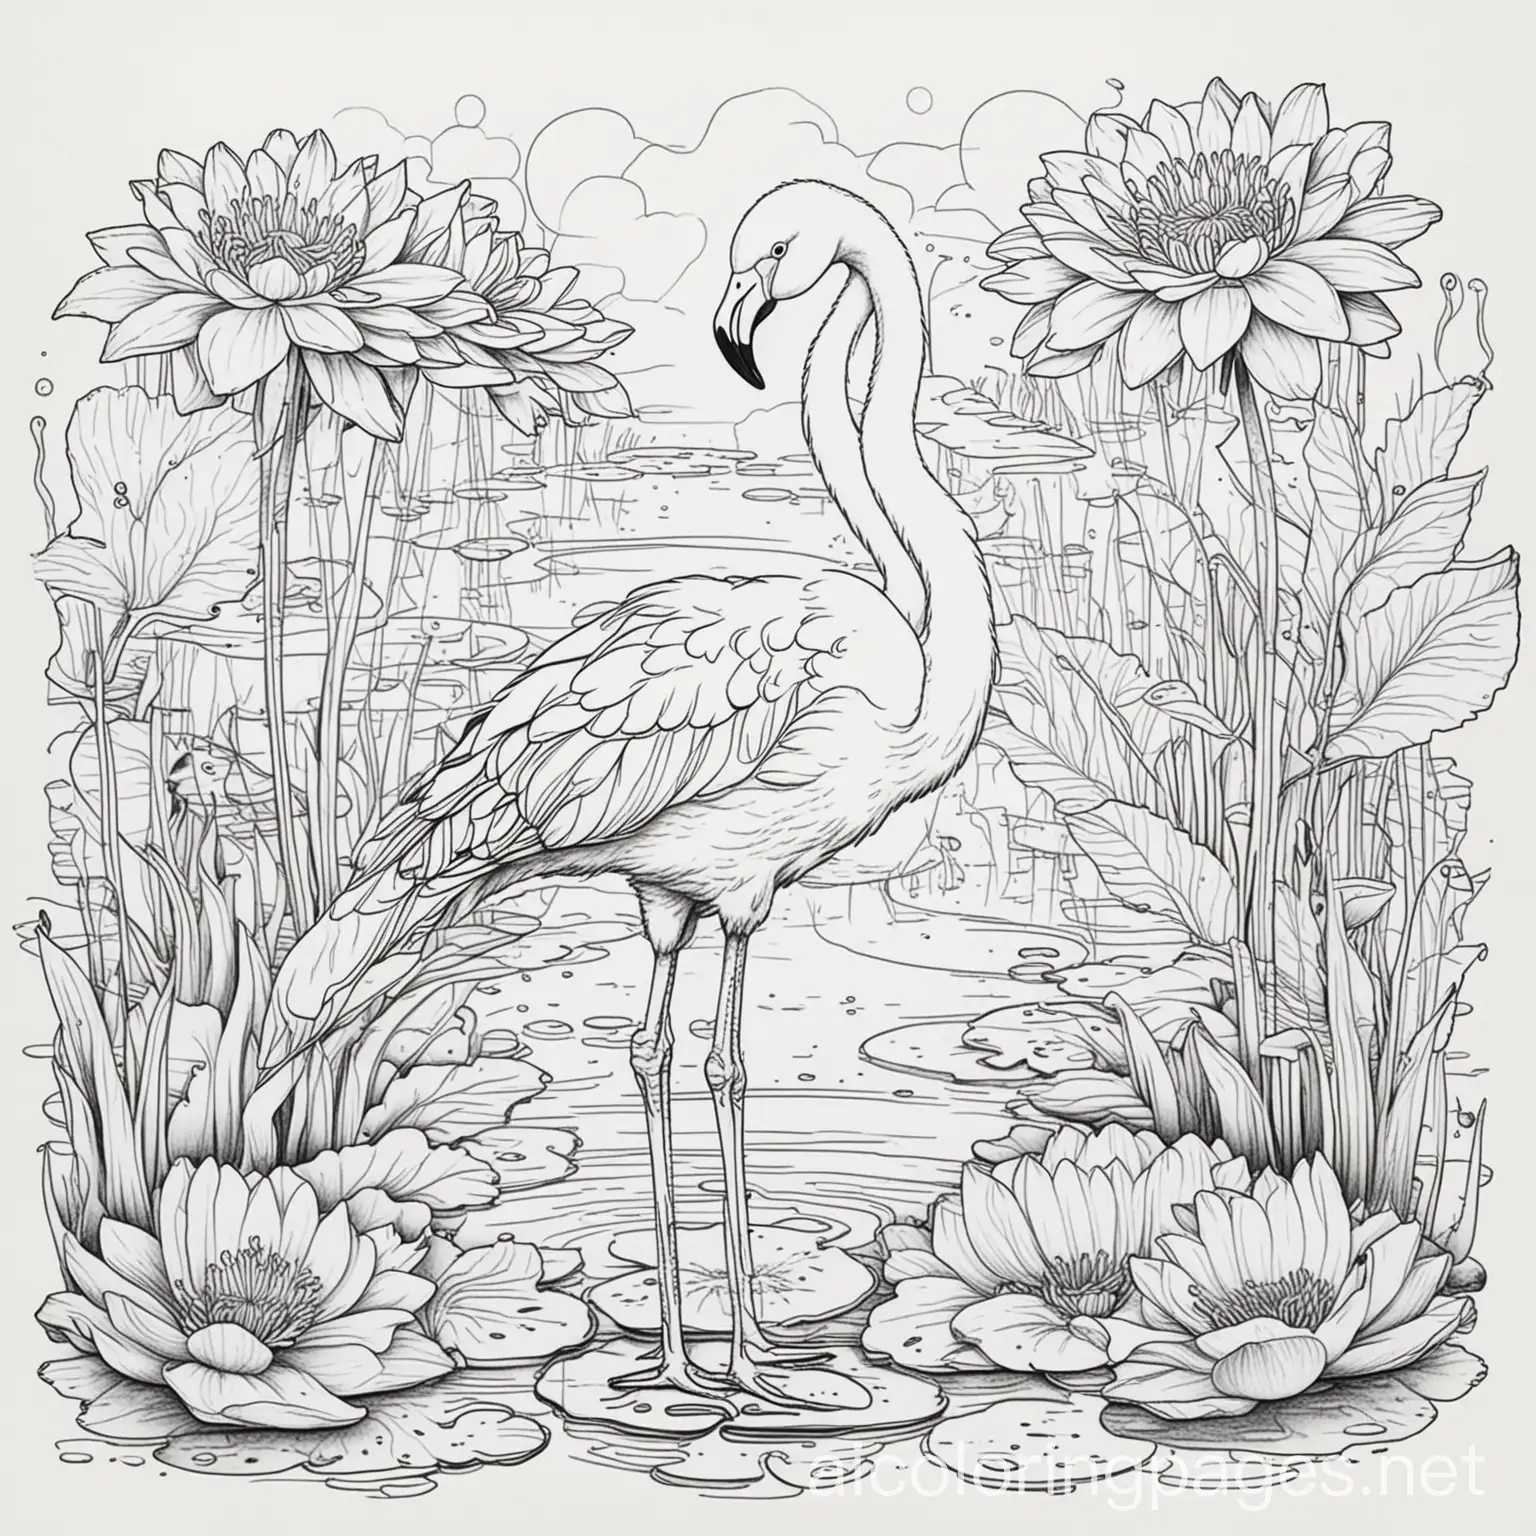 Flamingo standing in a pond with water lilies, kawaii style cartoon coloring page for kids, cartoon style, clean line art high detailed, no background, white, black, coloring book, sketchbook, realistic sketch, free lines, on paper, character sheet, 8k, Coloring Page, black and white, line art, white background, Simplicity, Ample White Space. The background of the coloring page is plain white to make it easy for young children to color within the lines. The outlines of all the subjects are easy to distinguish, making it simple for kids to color without too much difficulty